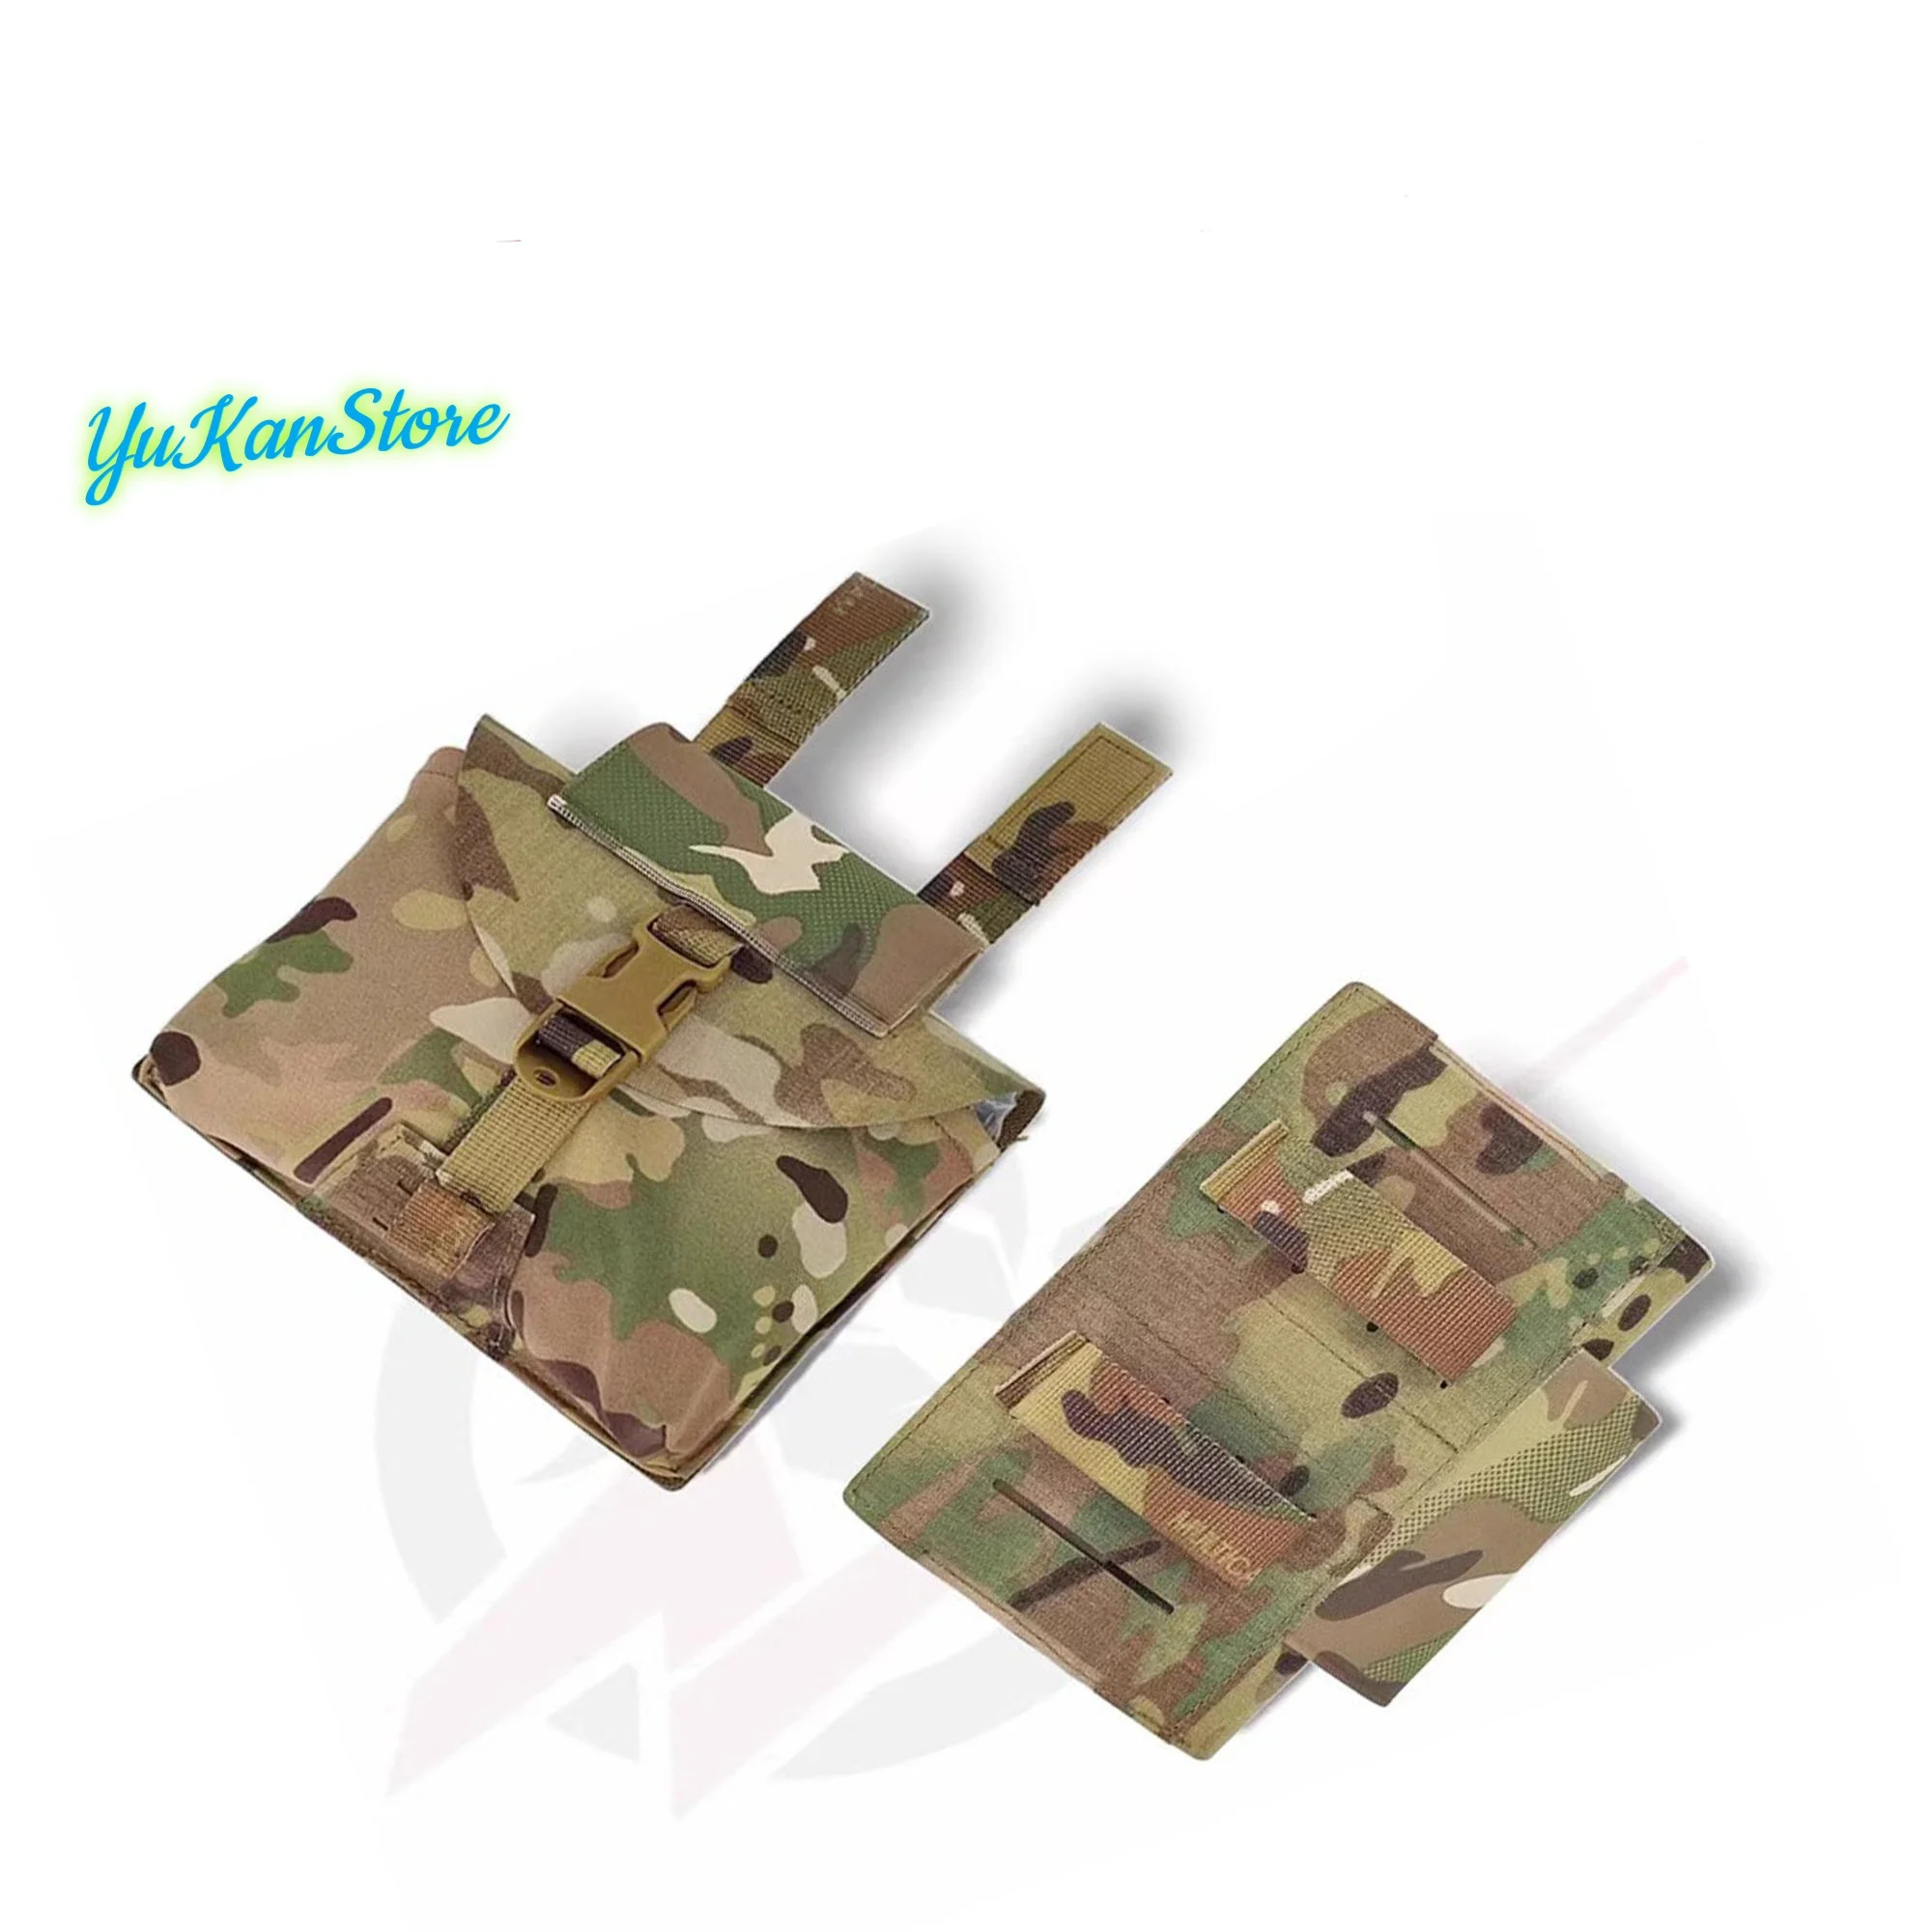 

GBRS Elastic First-aid Trauma Kit Quick Access EMT/Tactical MC Camouflage Multi-color Medical Bag